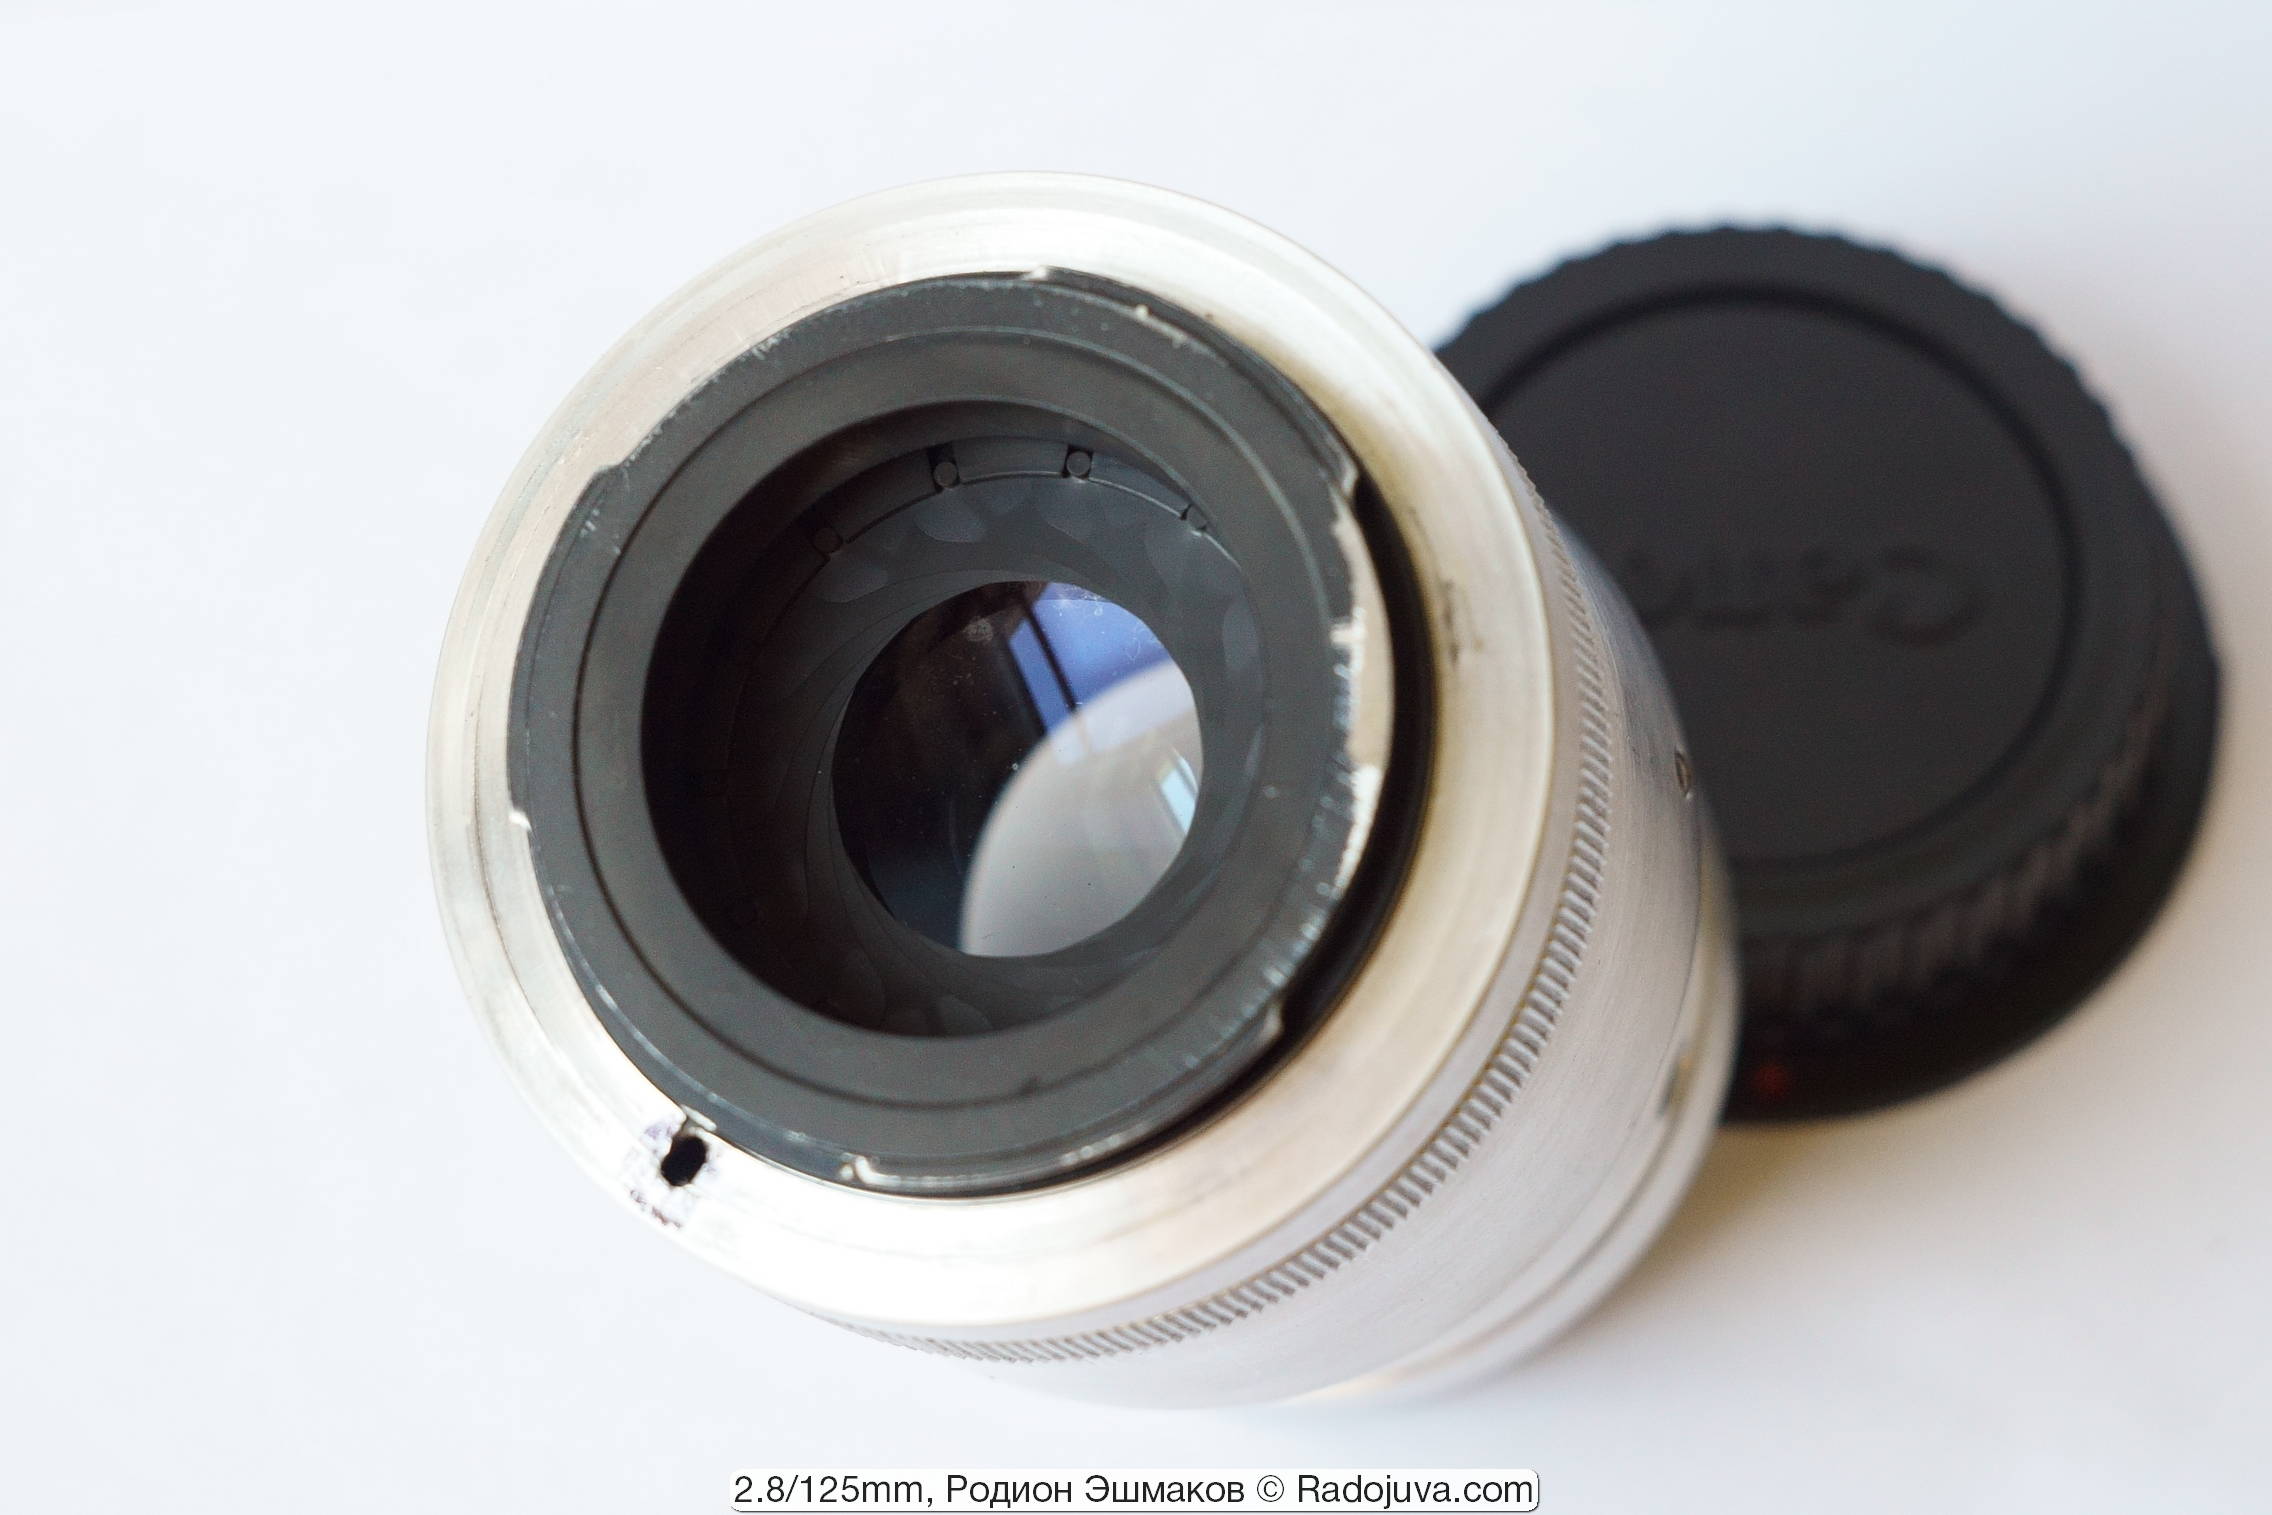 A luxurious lens diaphragm is visible from the shank side.